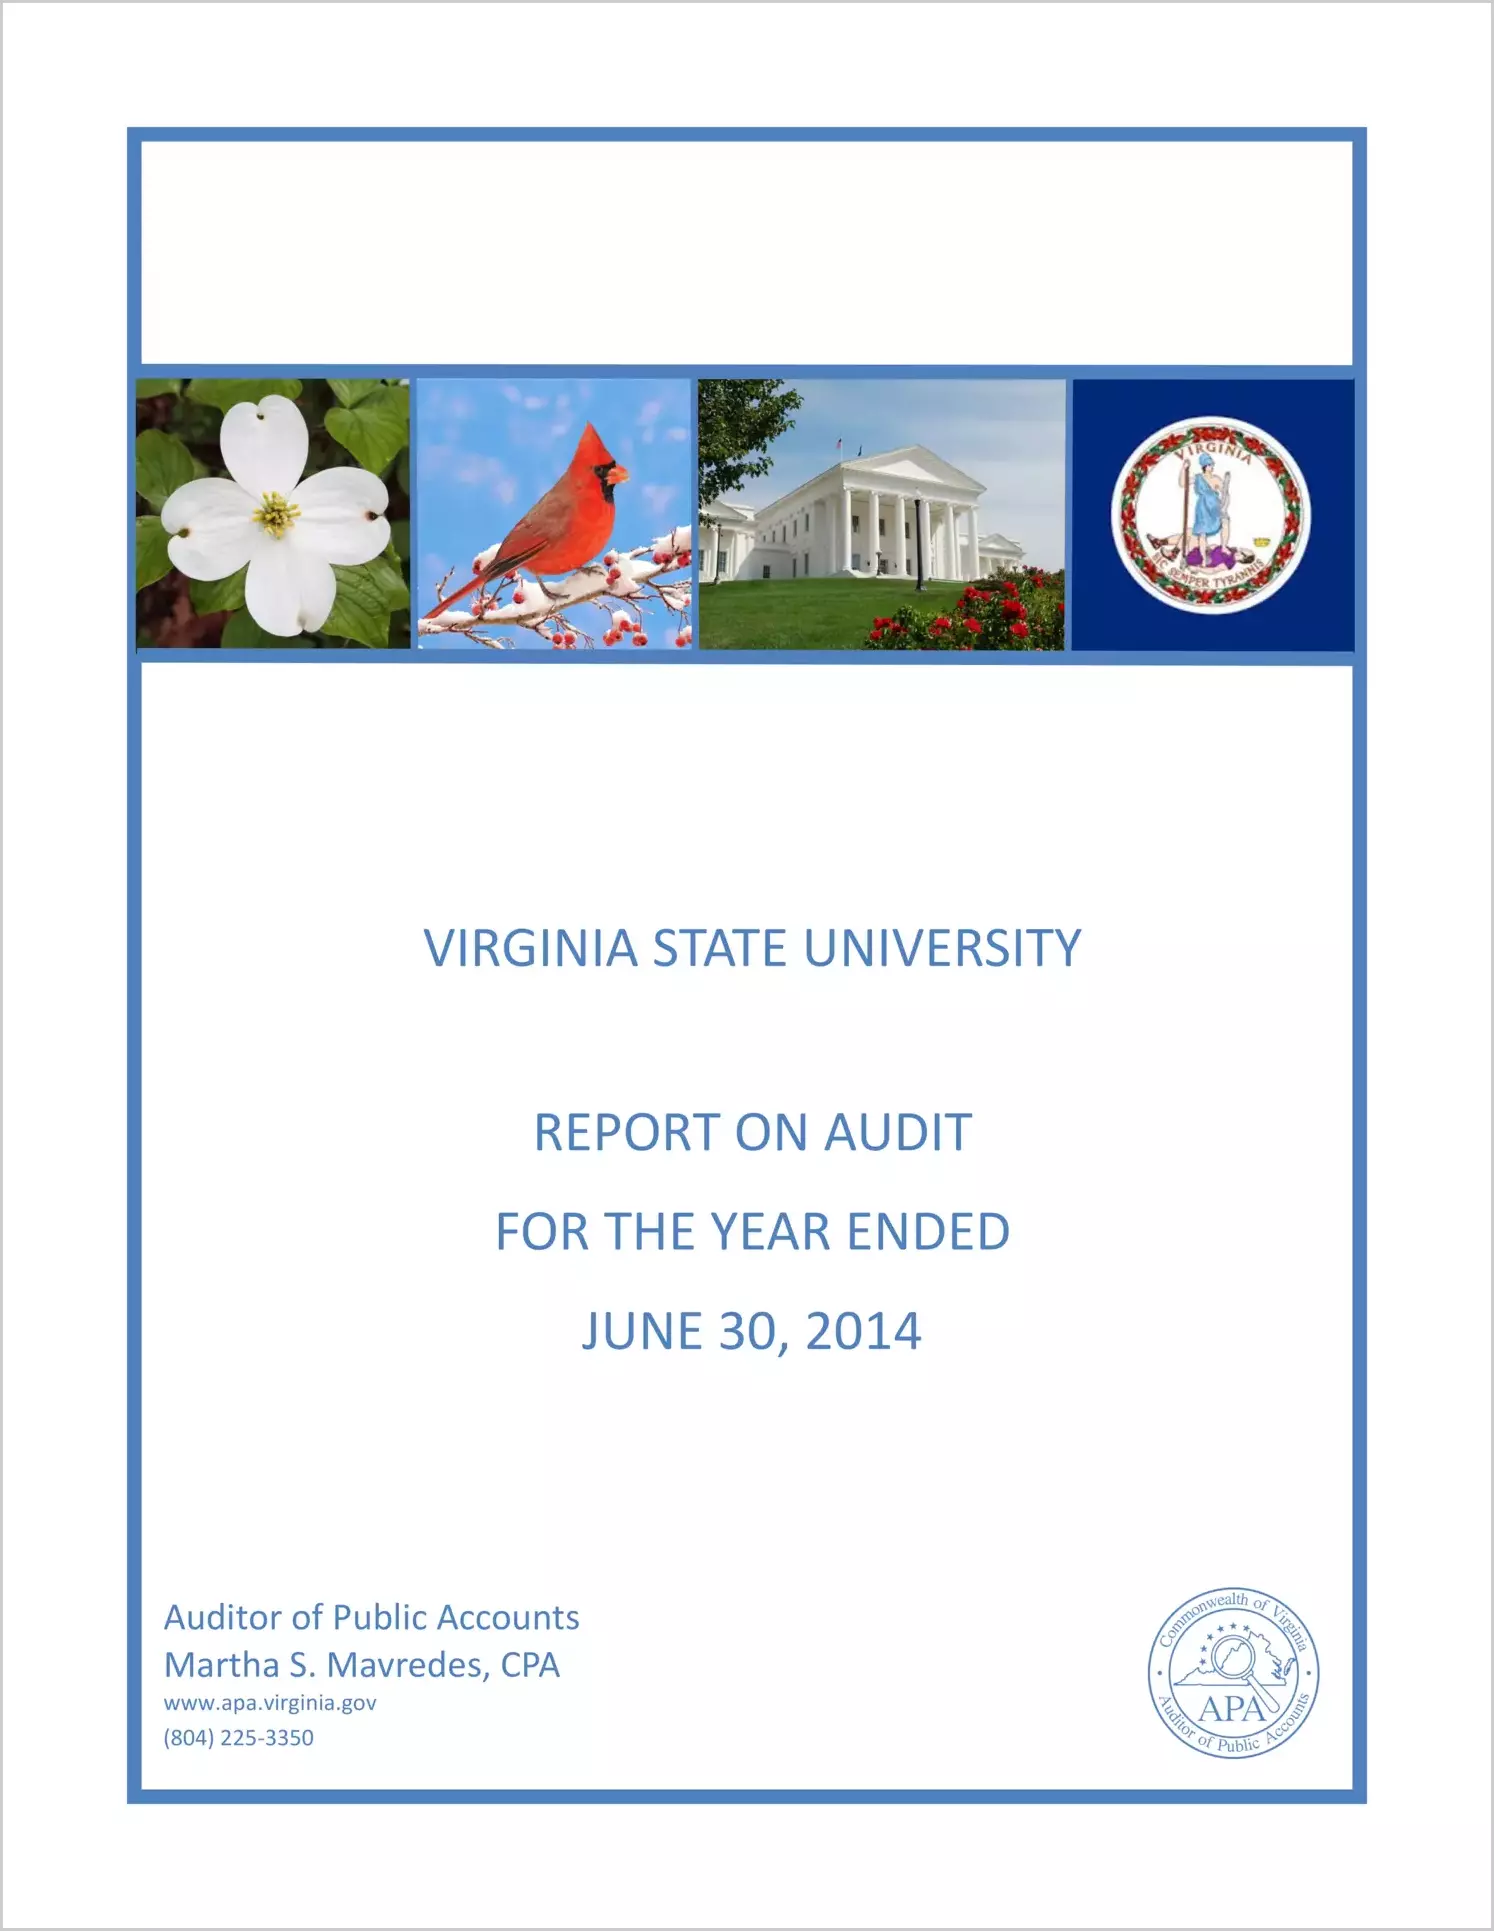 Virginia State University for the year ended June 30, 2014